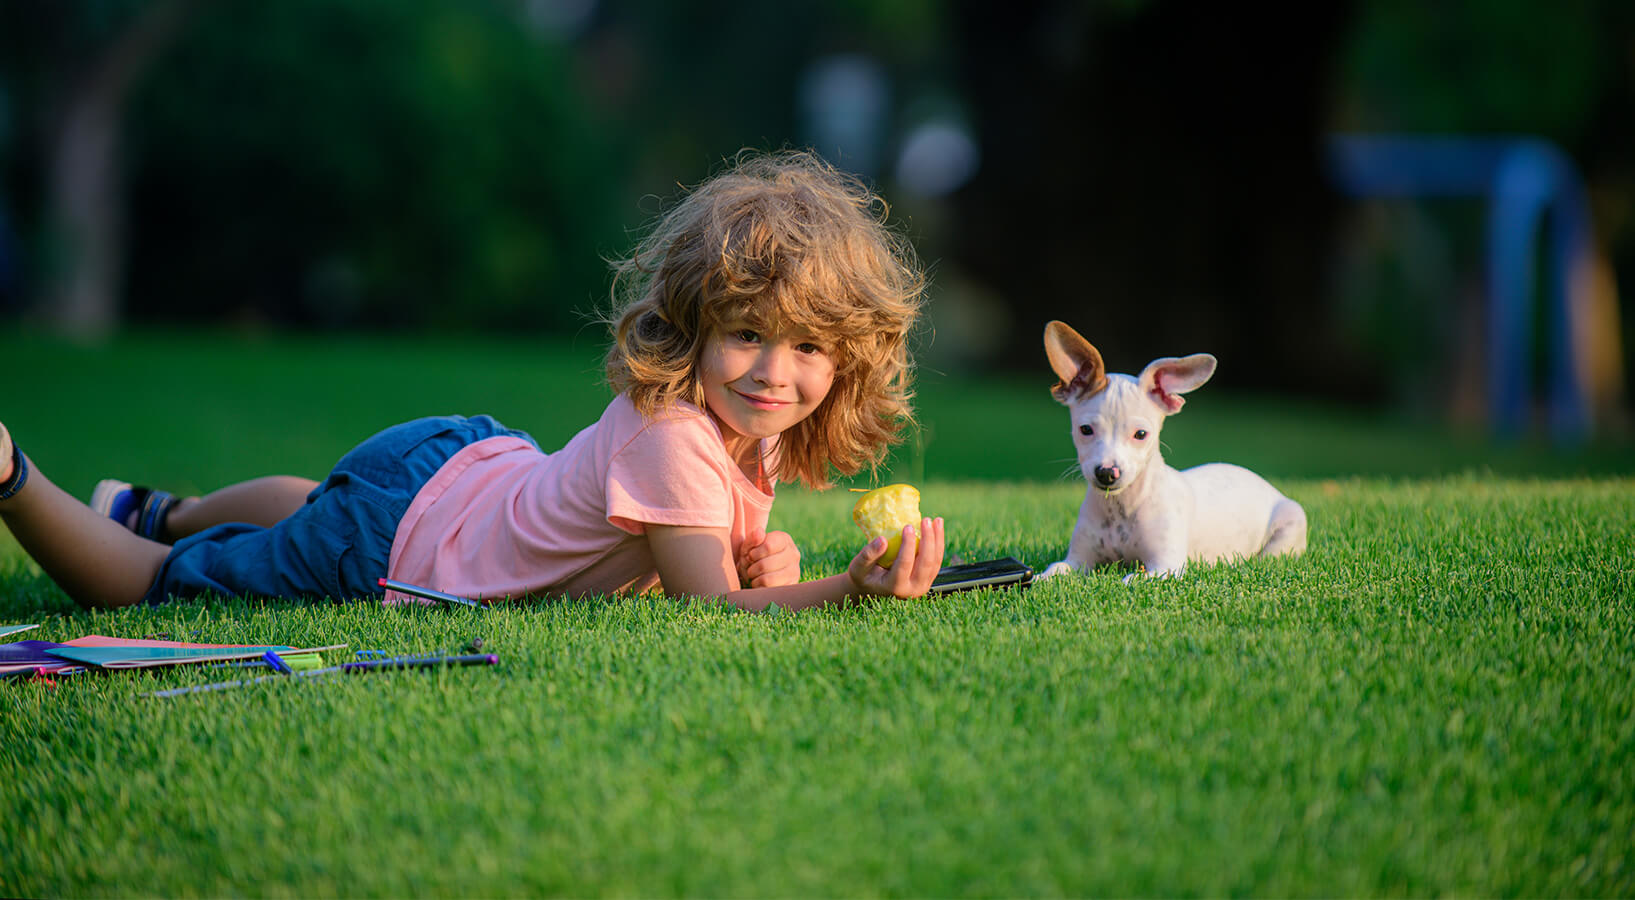 Kids and puppy on turf lawn